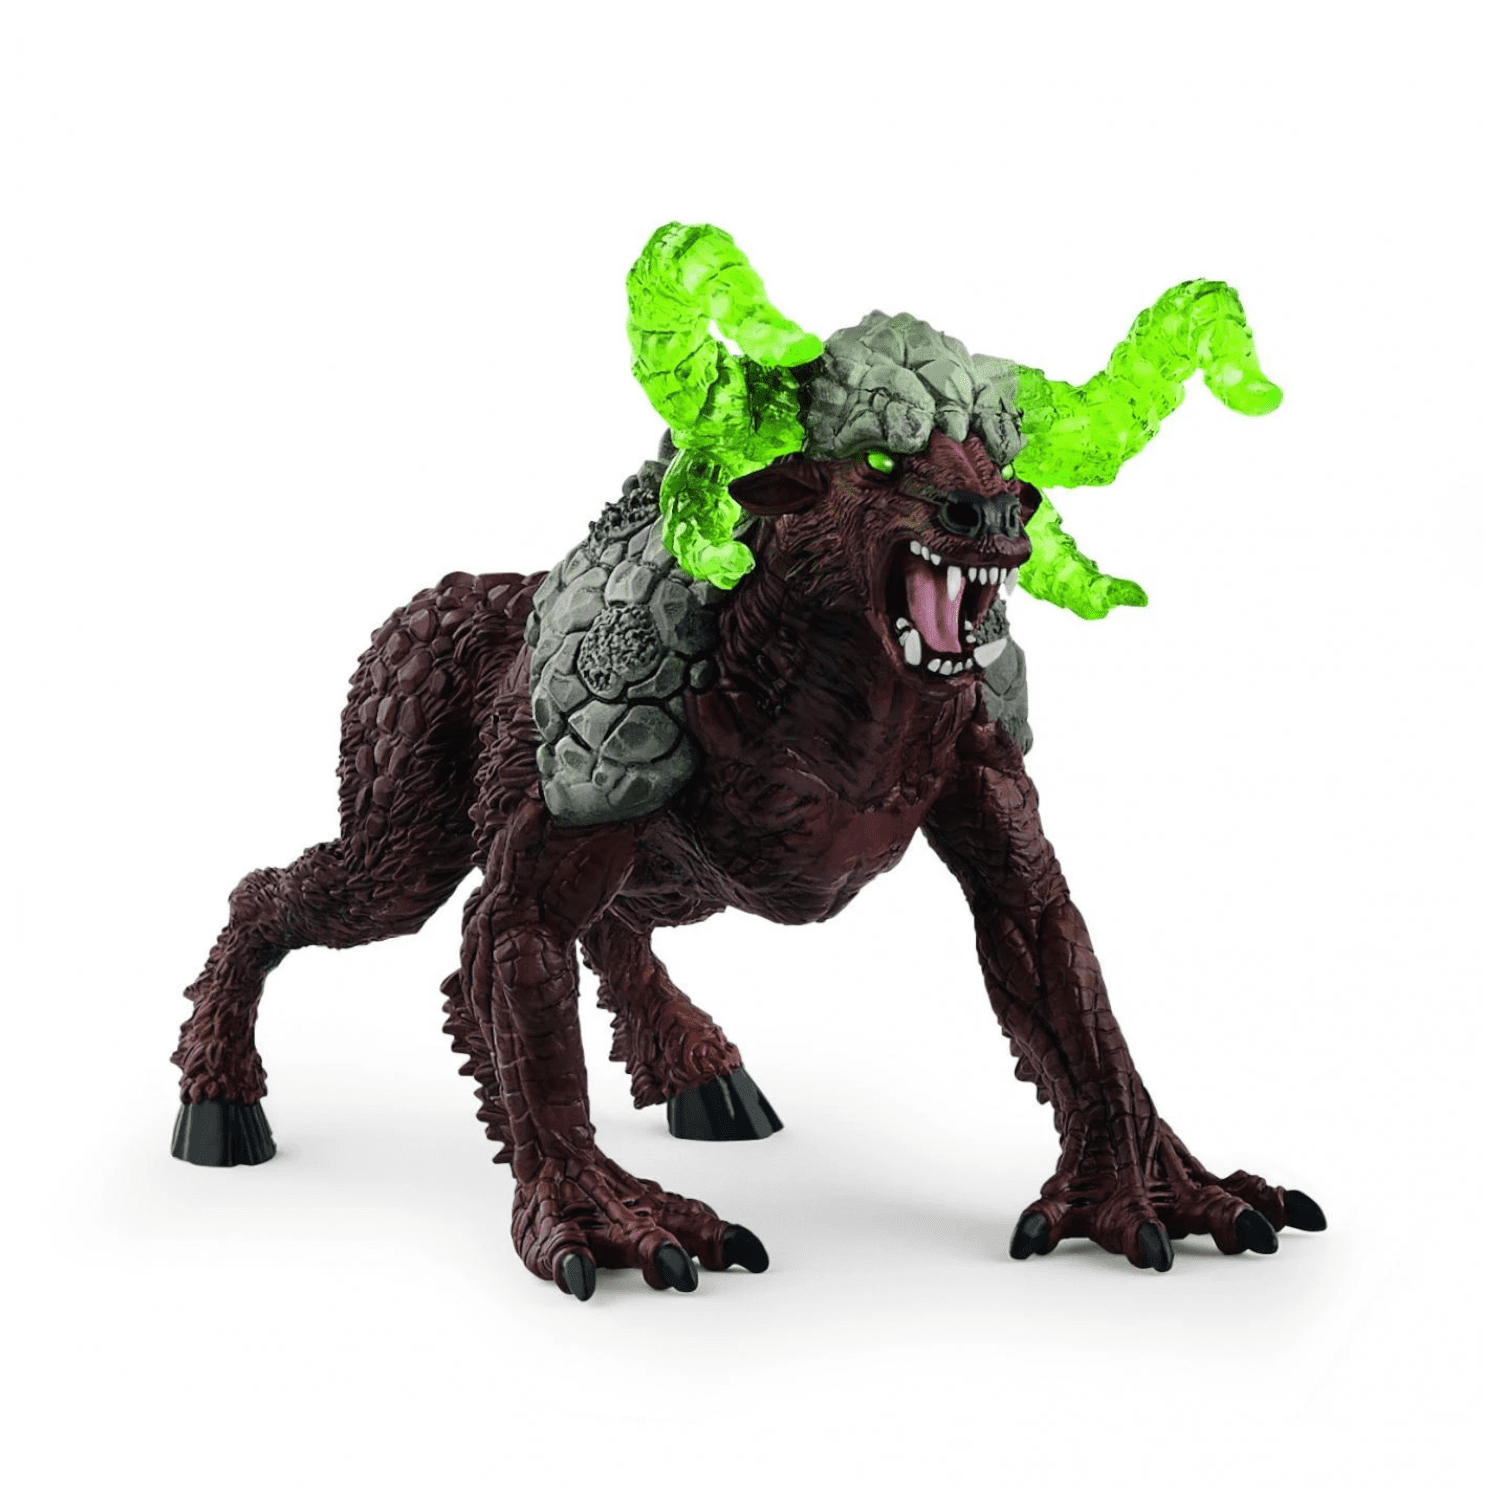 Plastic Toy Age 7-12 Years Schleich Hand Painted Animal Figure Lava Dragon 